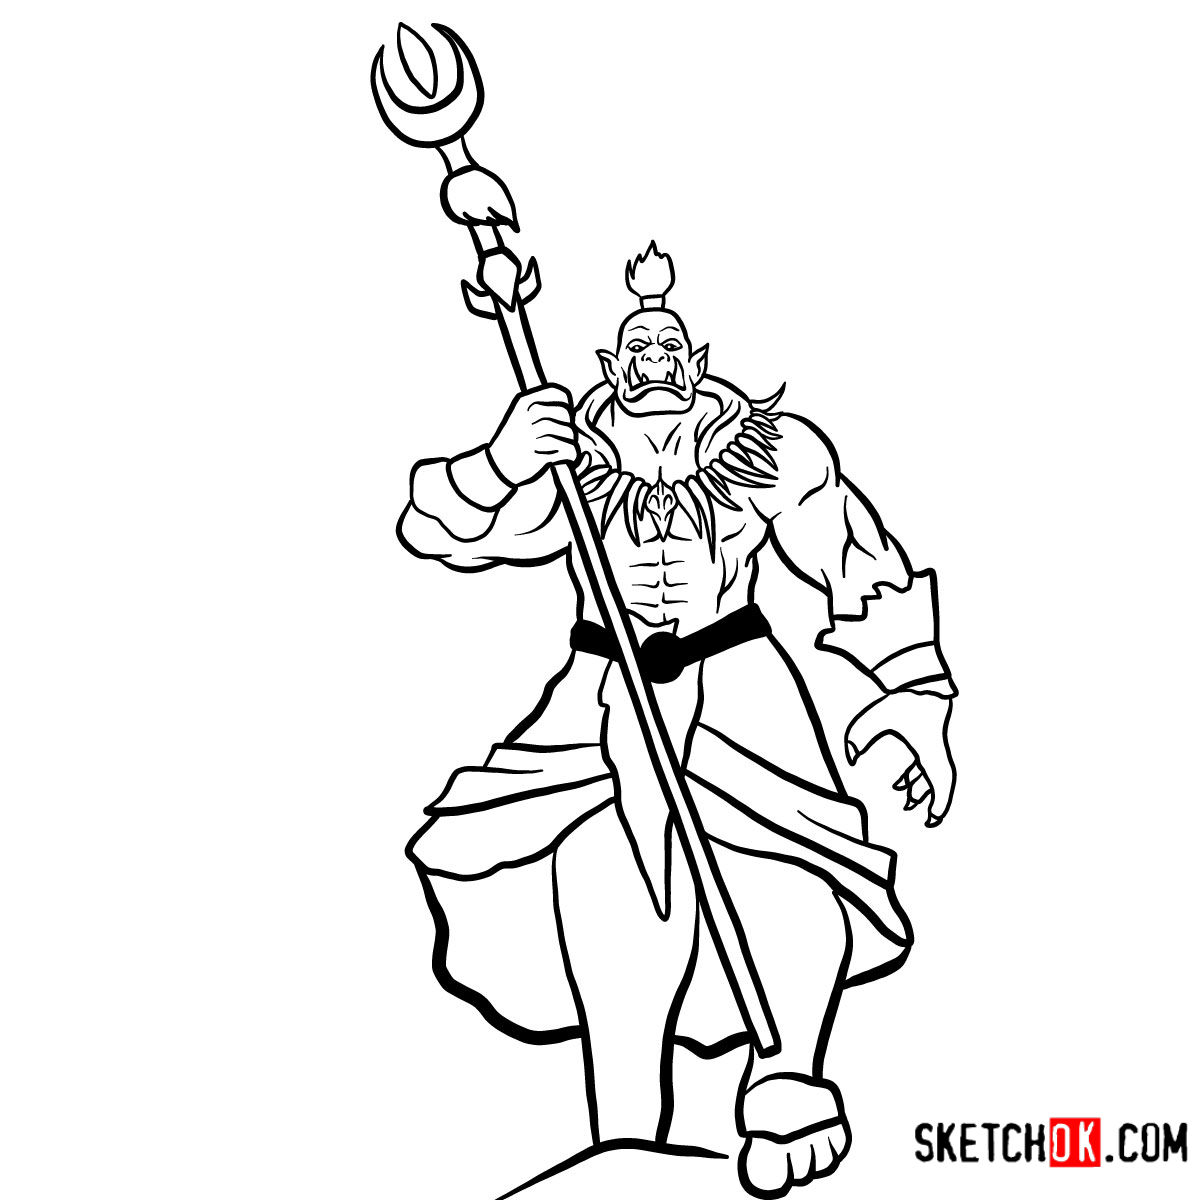 How to draw Ner'zhul | World of Warcraft